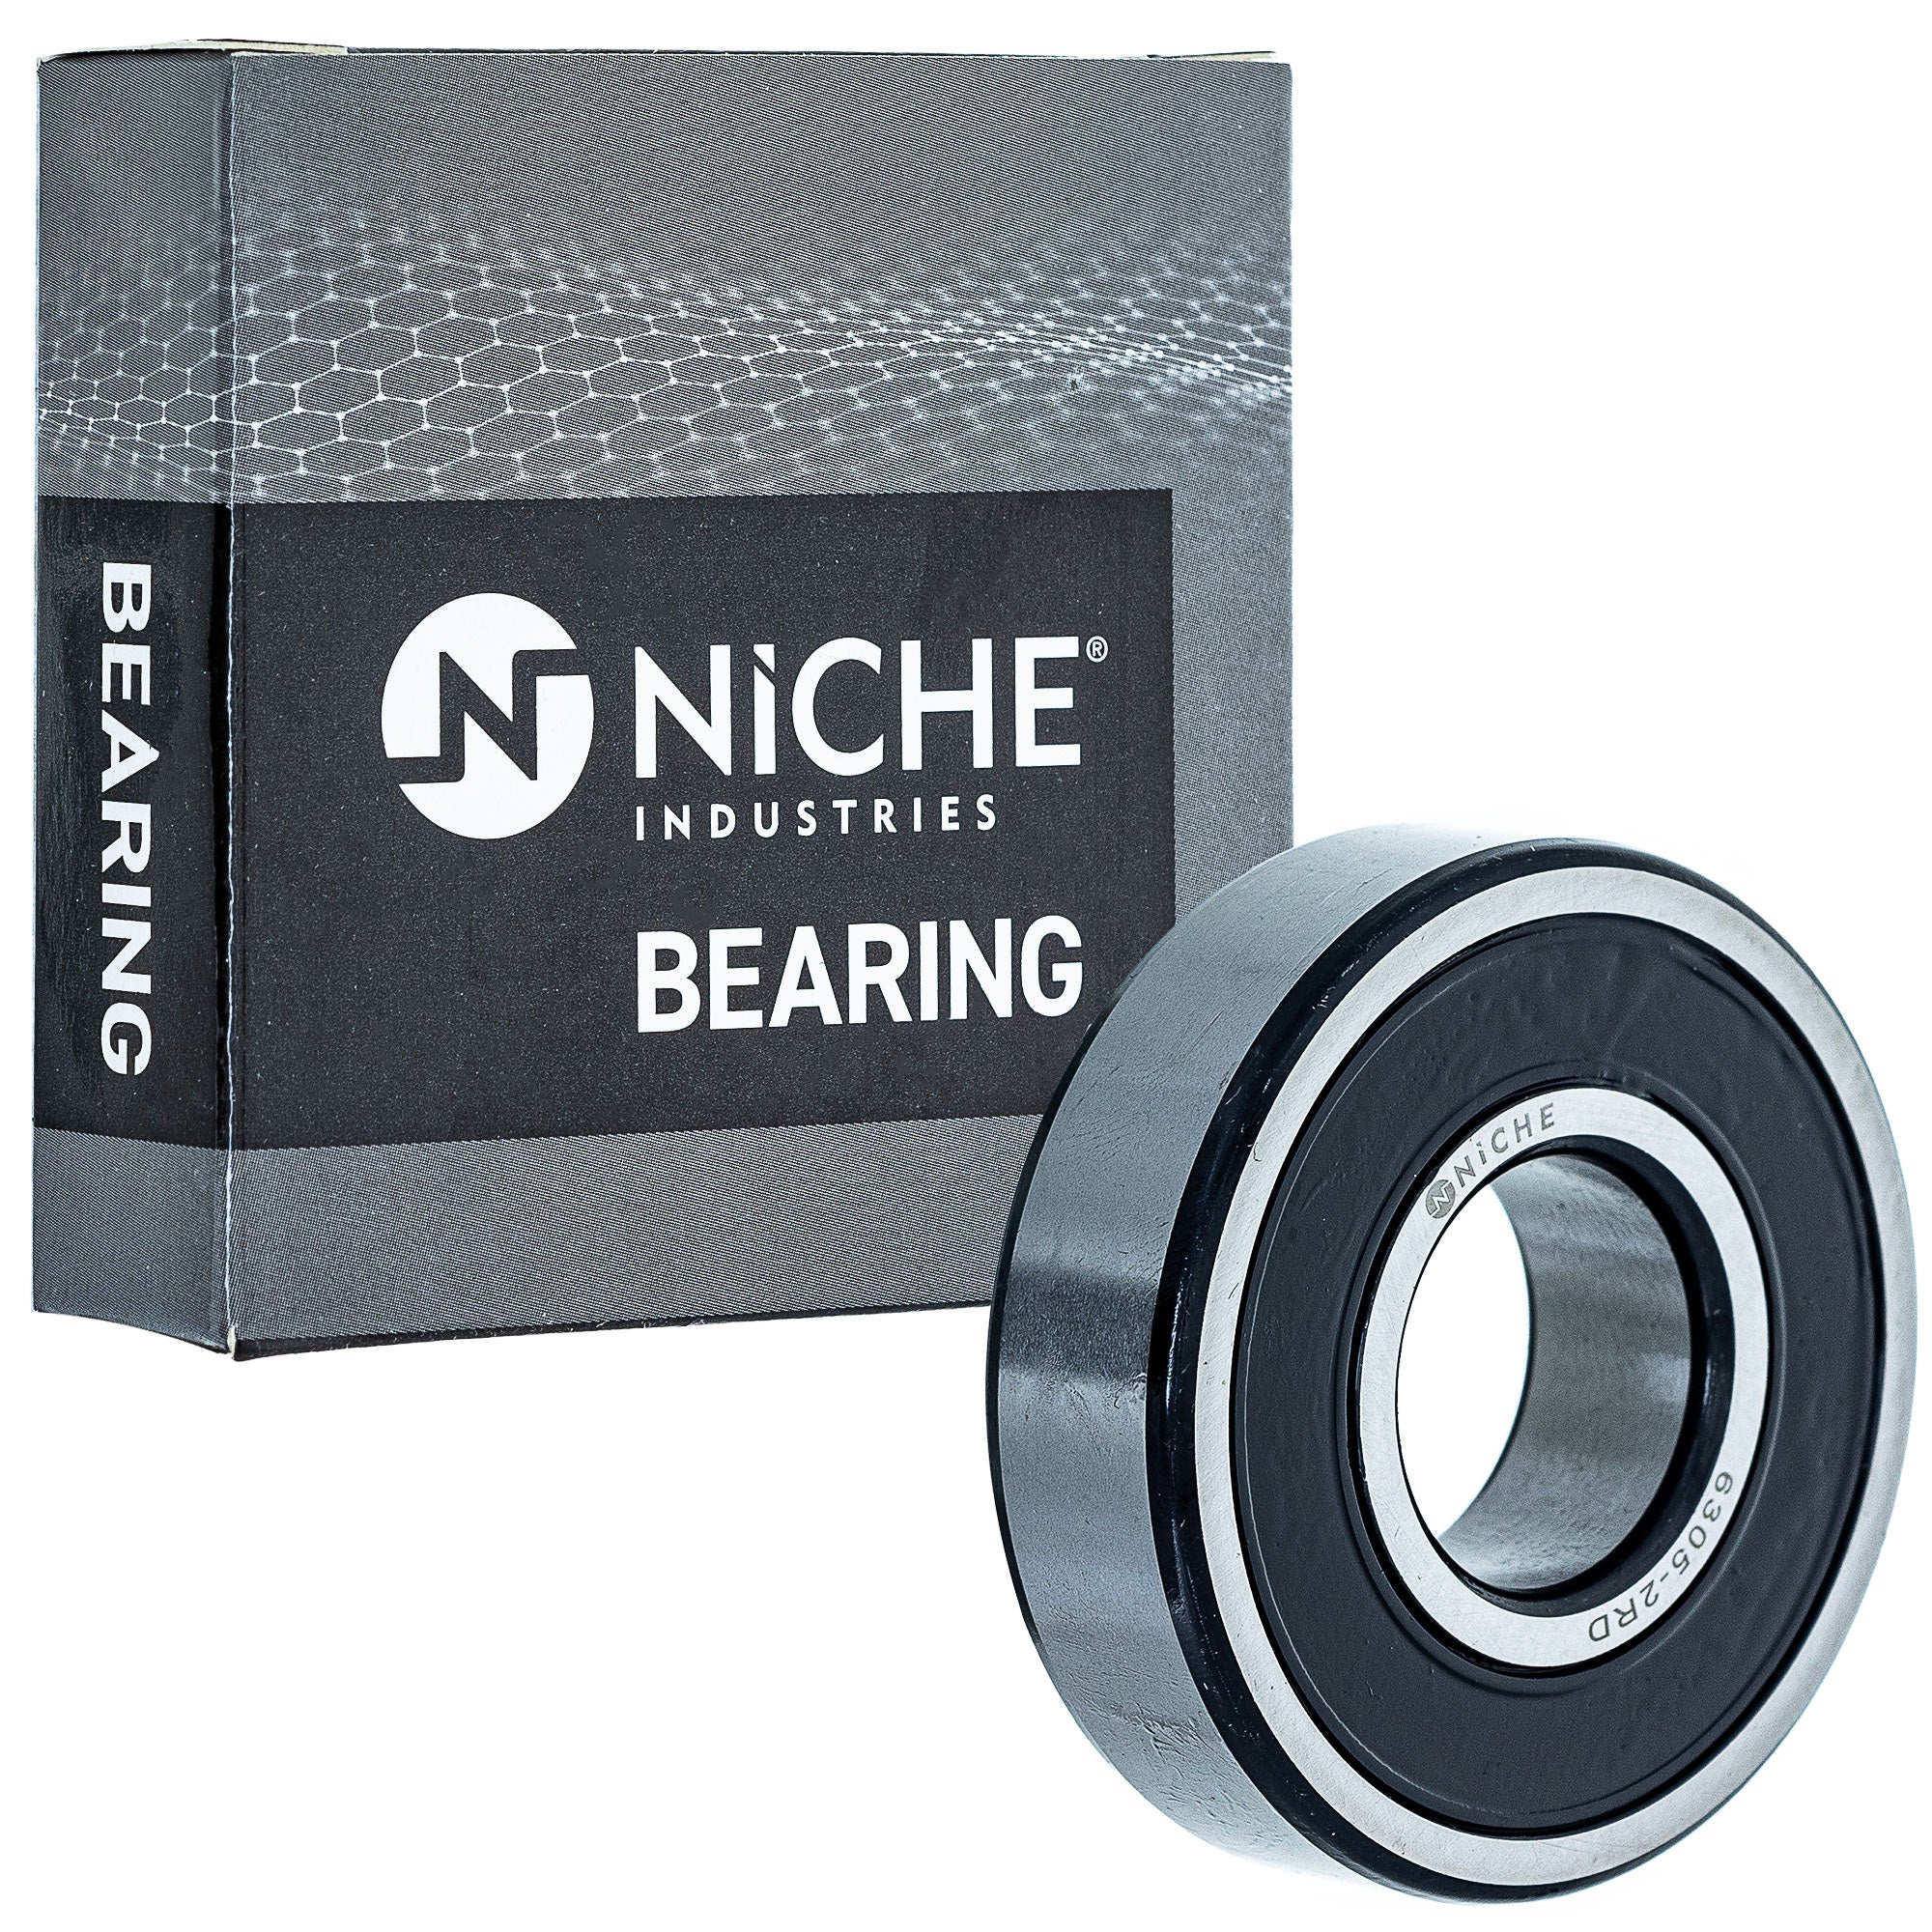 NICHE 519-CBB2290R Bearing & Seal Kit 2-Pack for zOTHER TX500 TTR250